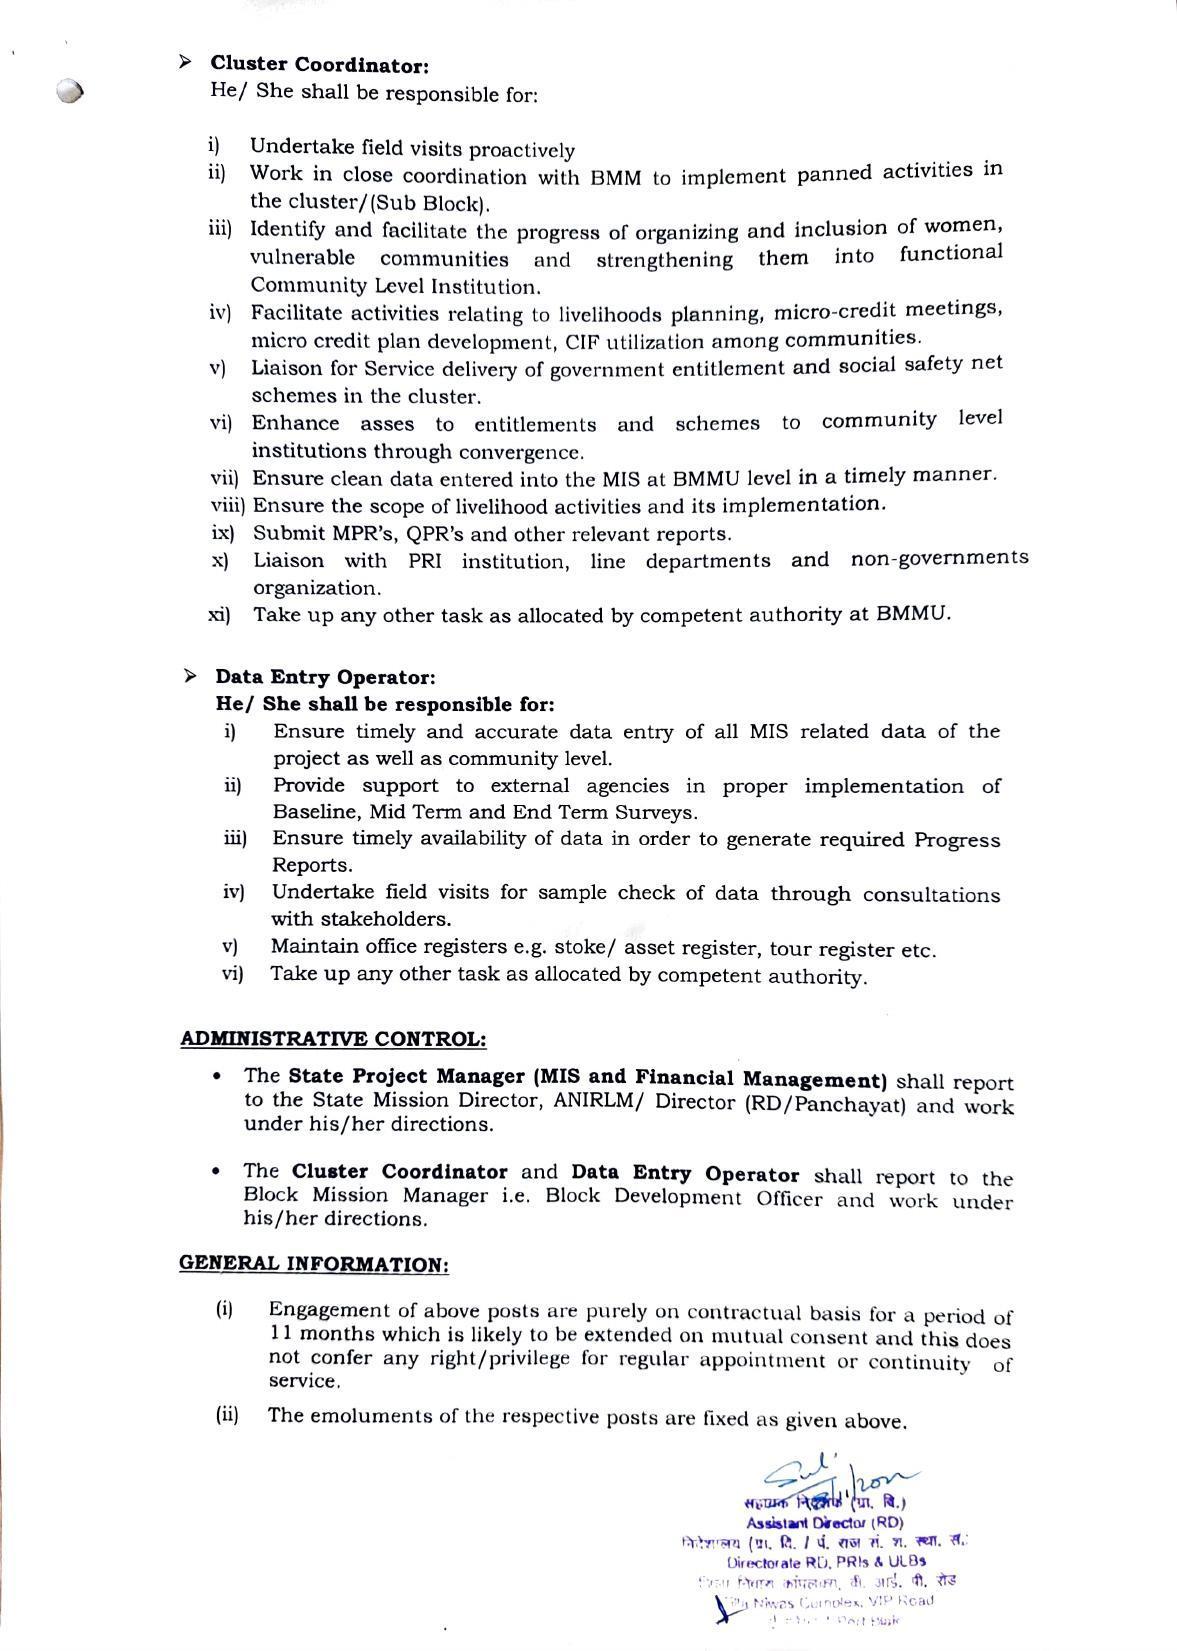 Andaman & Nicobar Administration Invites Application for 5 State Project Manager, Cluster Coordinator, More Vacancies Recruitment 2022 - Page 3